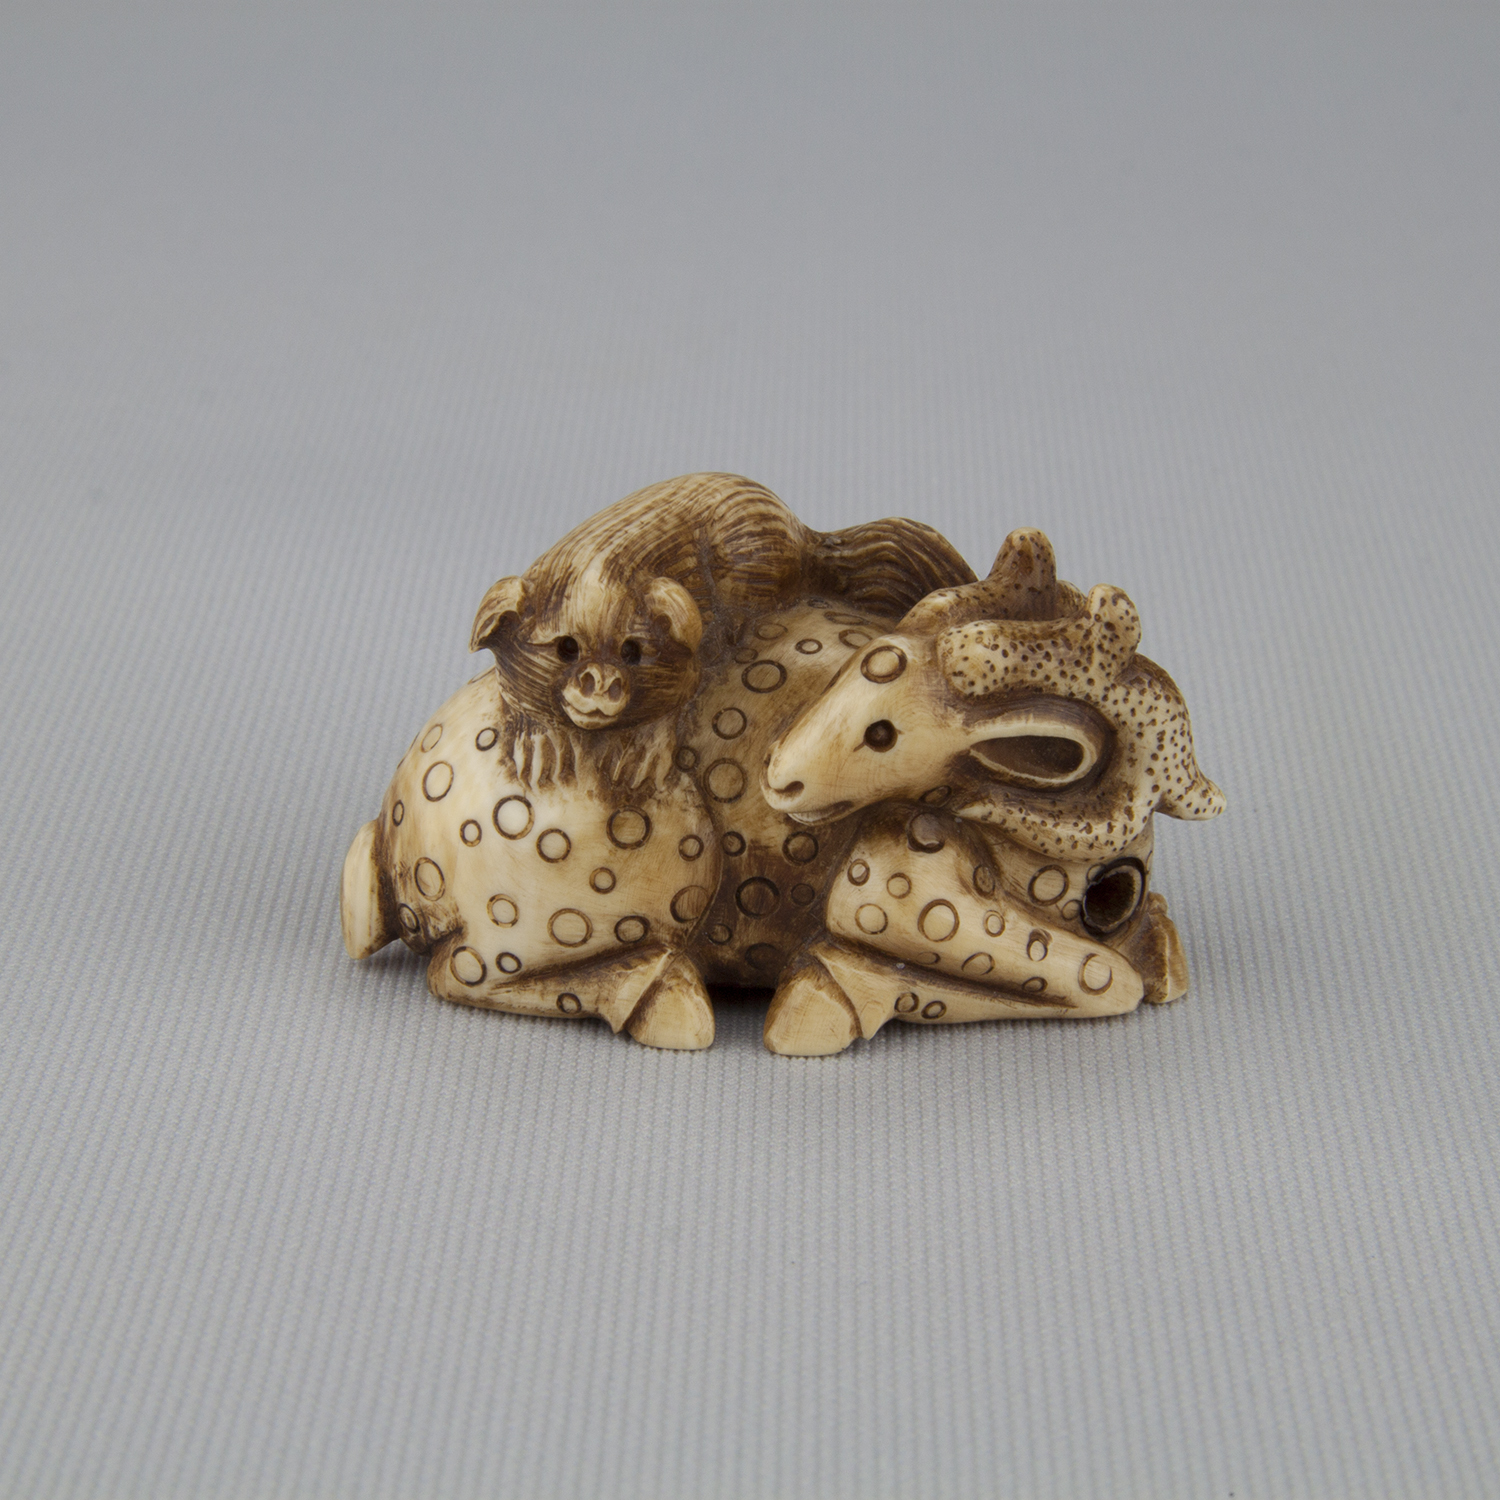 Netsuke depicting two animals, ca. 18th–19th century, Ivory, Gift of Mr. and Mrs. Nathaniel I. Grey, 1988.119